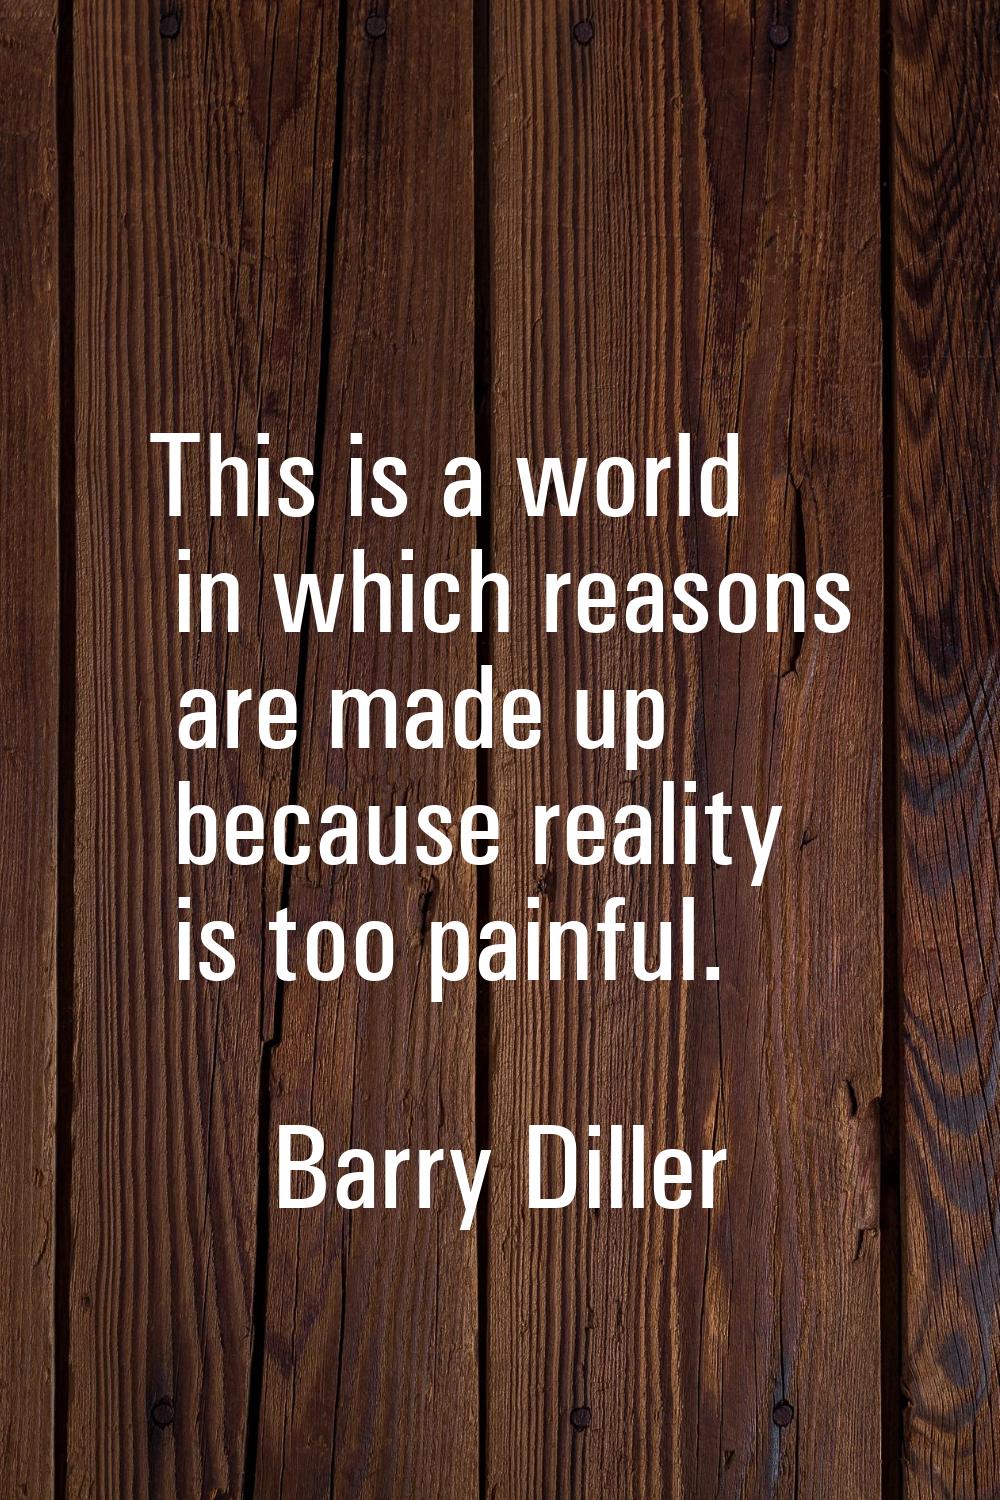 This is a world in which reasons are made up because reality is too painful.